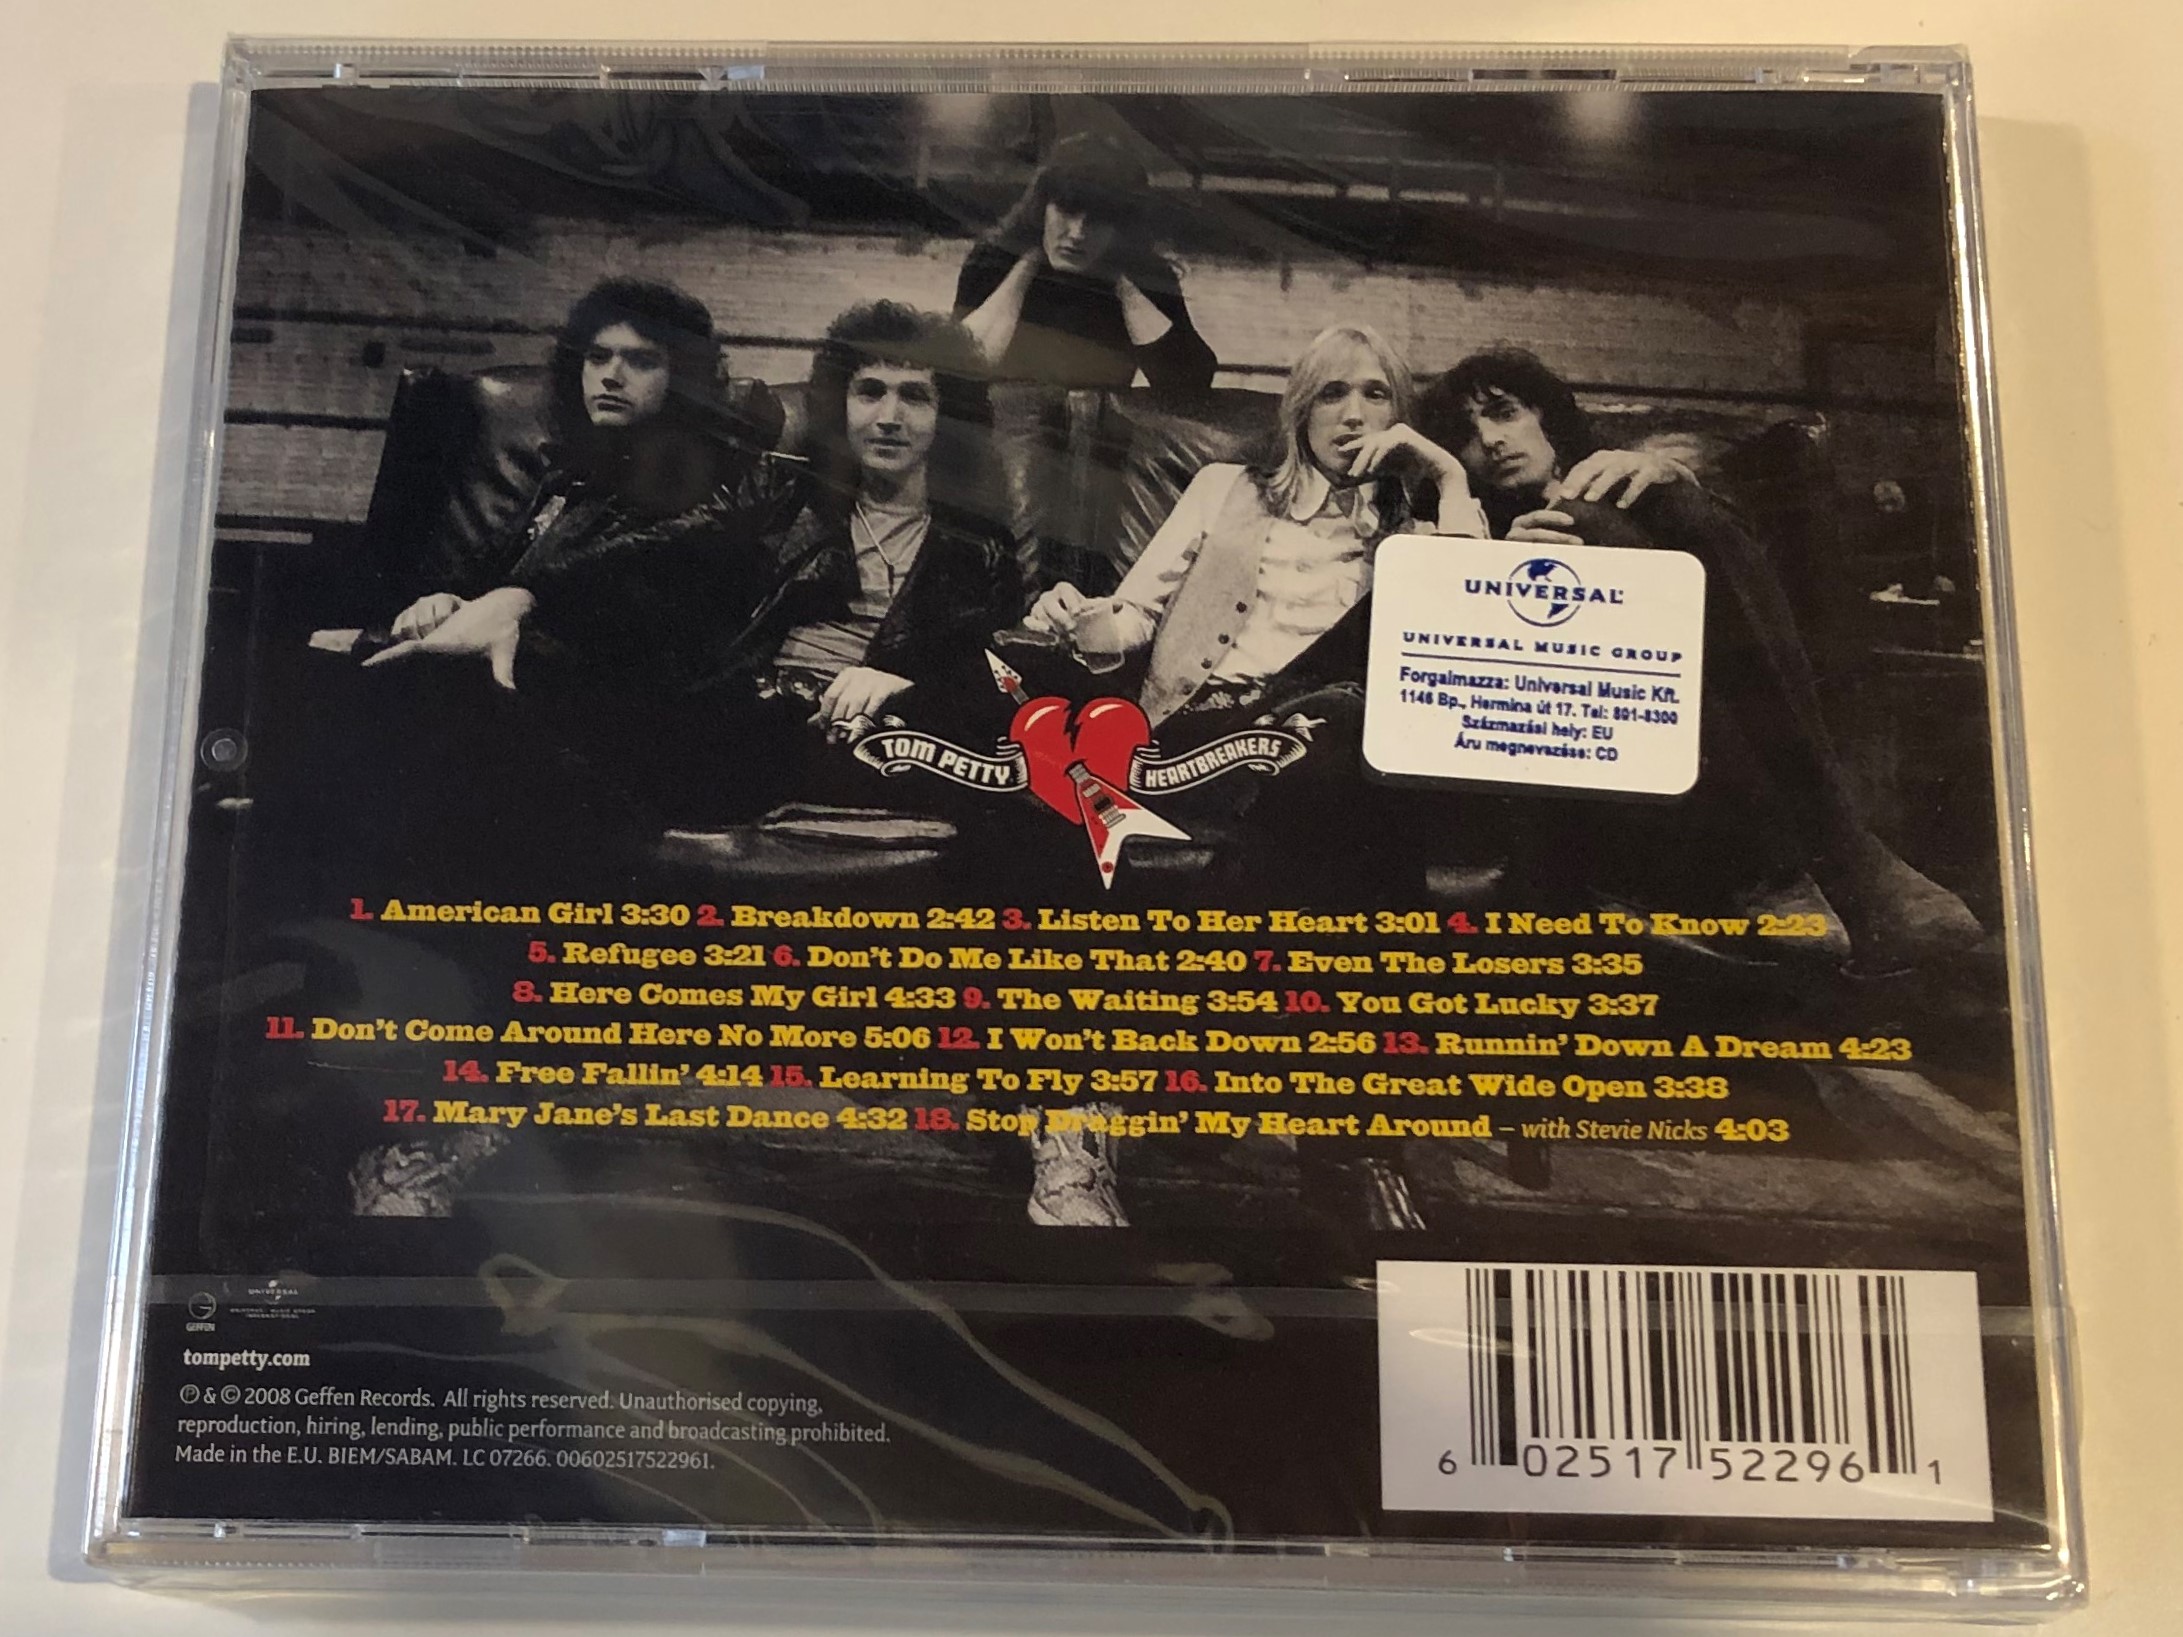 tom-petty-and-the-heartbreakers-greatest-hits-the-classic-hits-collection-remastered-now-including-stop-draggin-my-heart-around-with-stevie-nicks-geffen-records-audio-cd-2008-00602.jpg